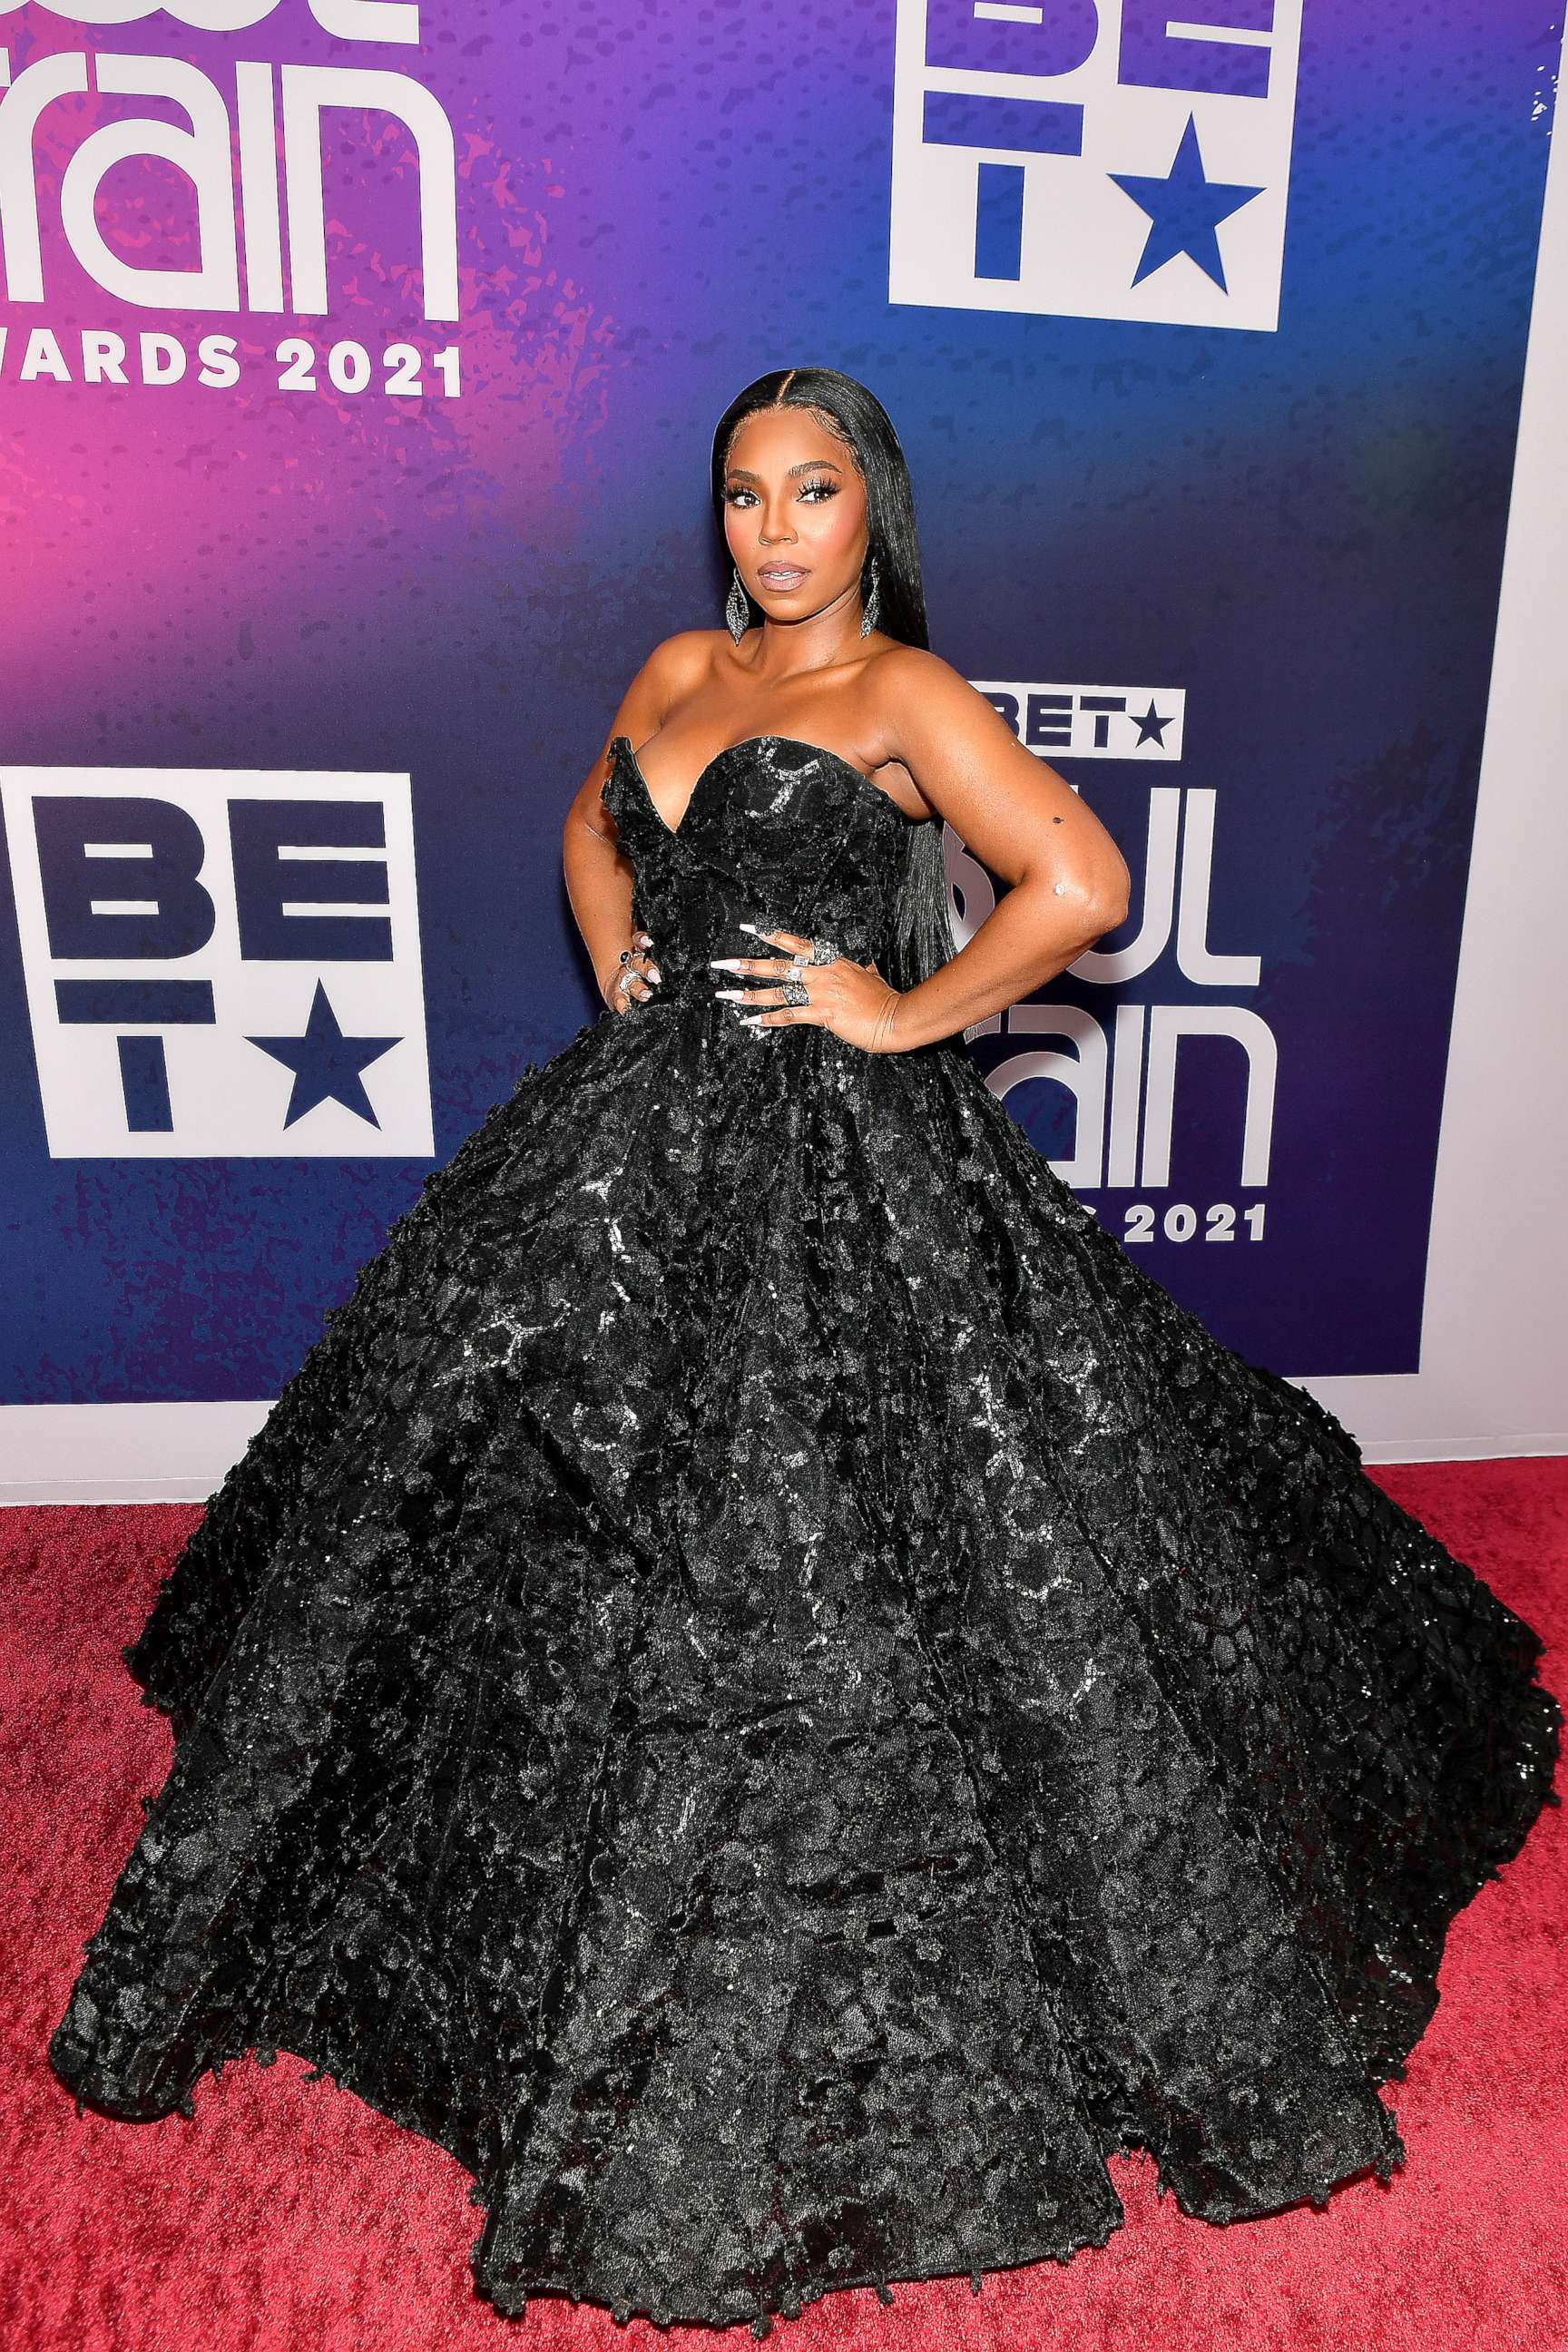 PHOTO: Ashanti attends The 2021 Soul Train Awards presented by BET at the world famous Apollo theater in New York City on Nov. 20, 2021.